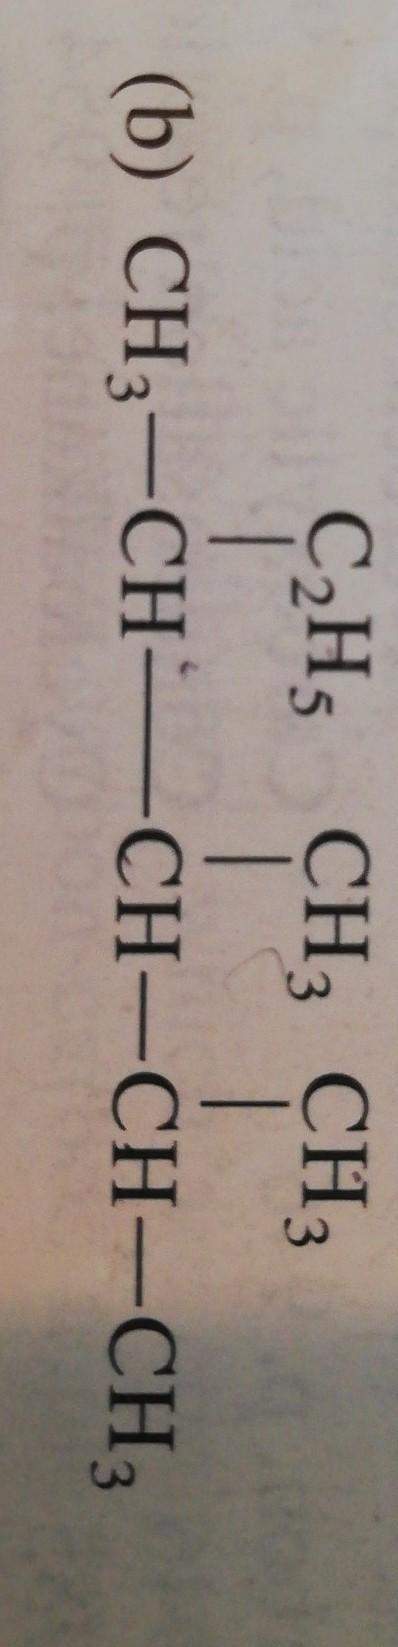 Hello, how would you name this compound and why? the textbook says 2,3,4 trimethyl hexane, but isn'